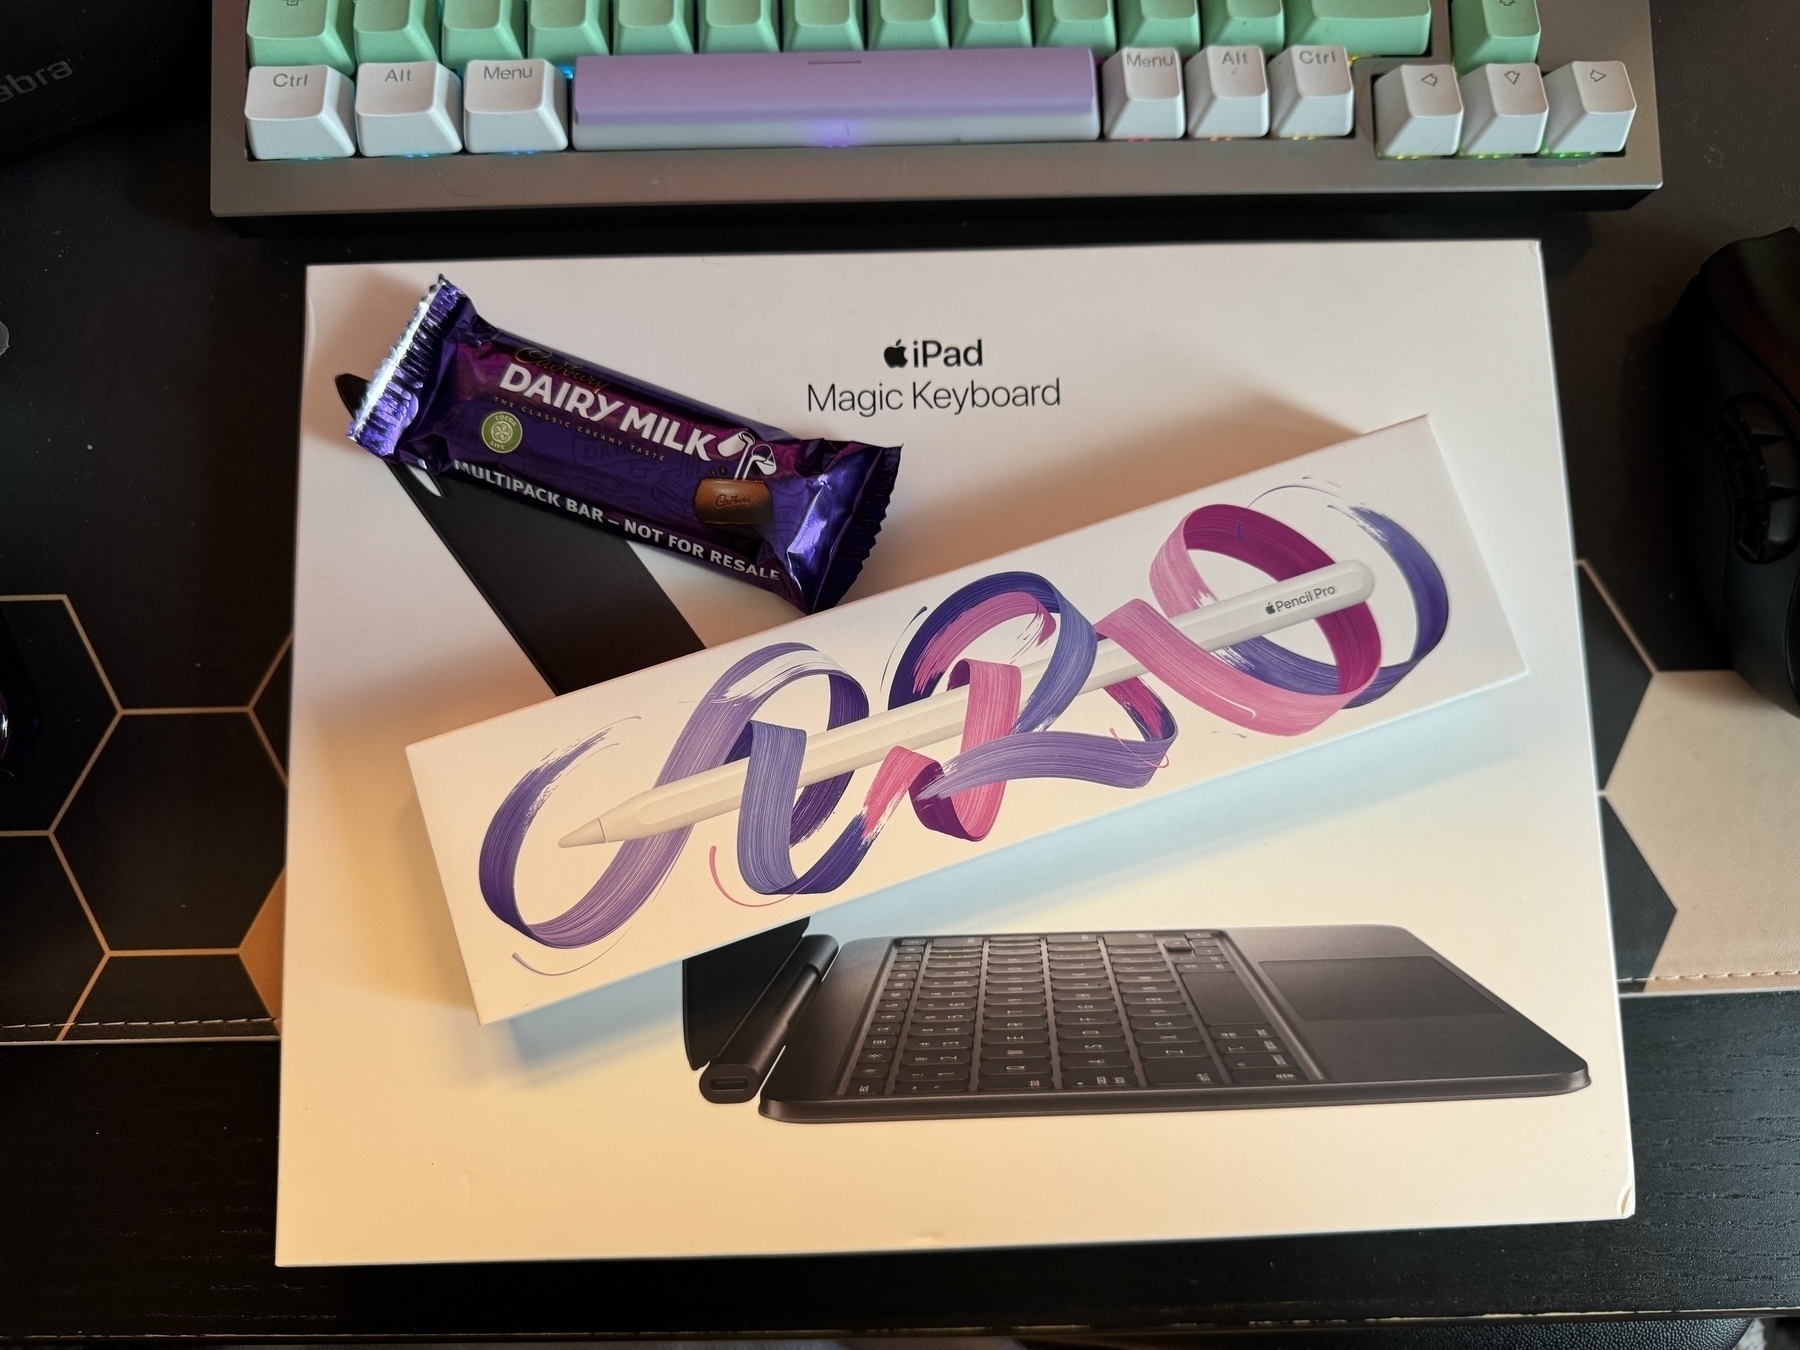 A new Apple Pencil box on a new Magic Keyboard box, with a dairy milk bar for reference. The Apple Pencil box has pink and purple doodle brush strokes on it.